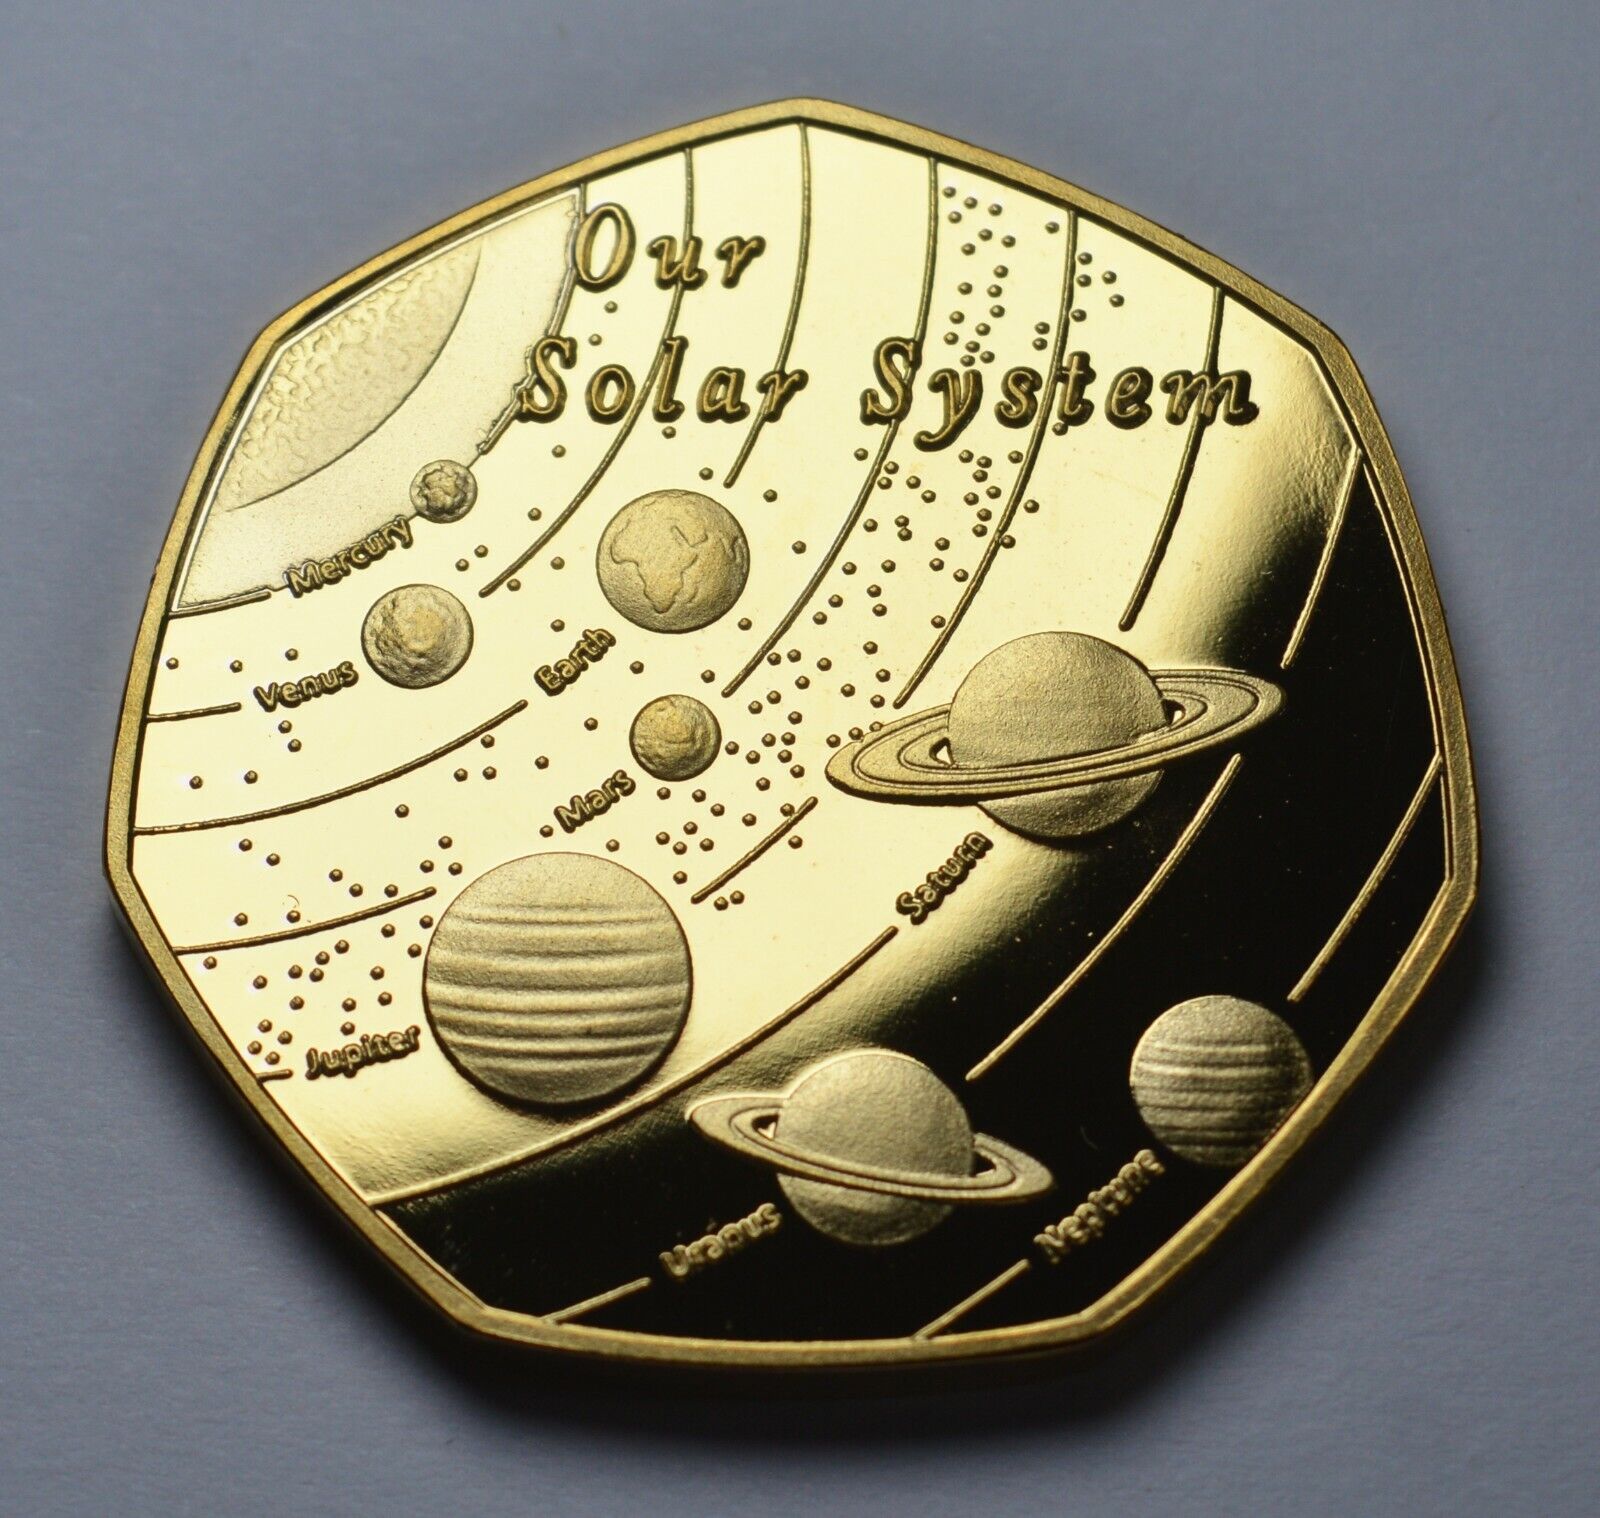 OUR SOLAR SYSTEM 24ct Gold Commemorative. Space/Planets/Stars Earth/Moon/Mars 